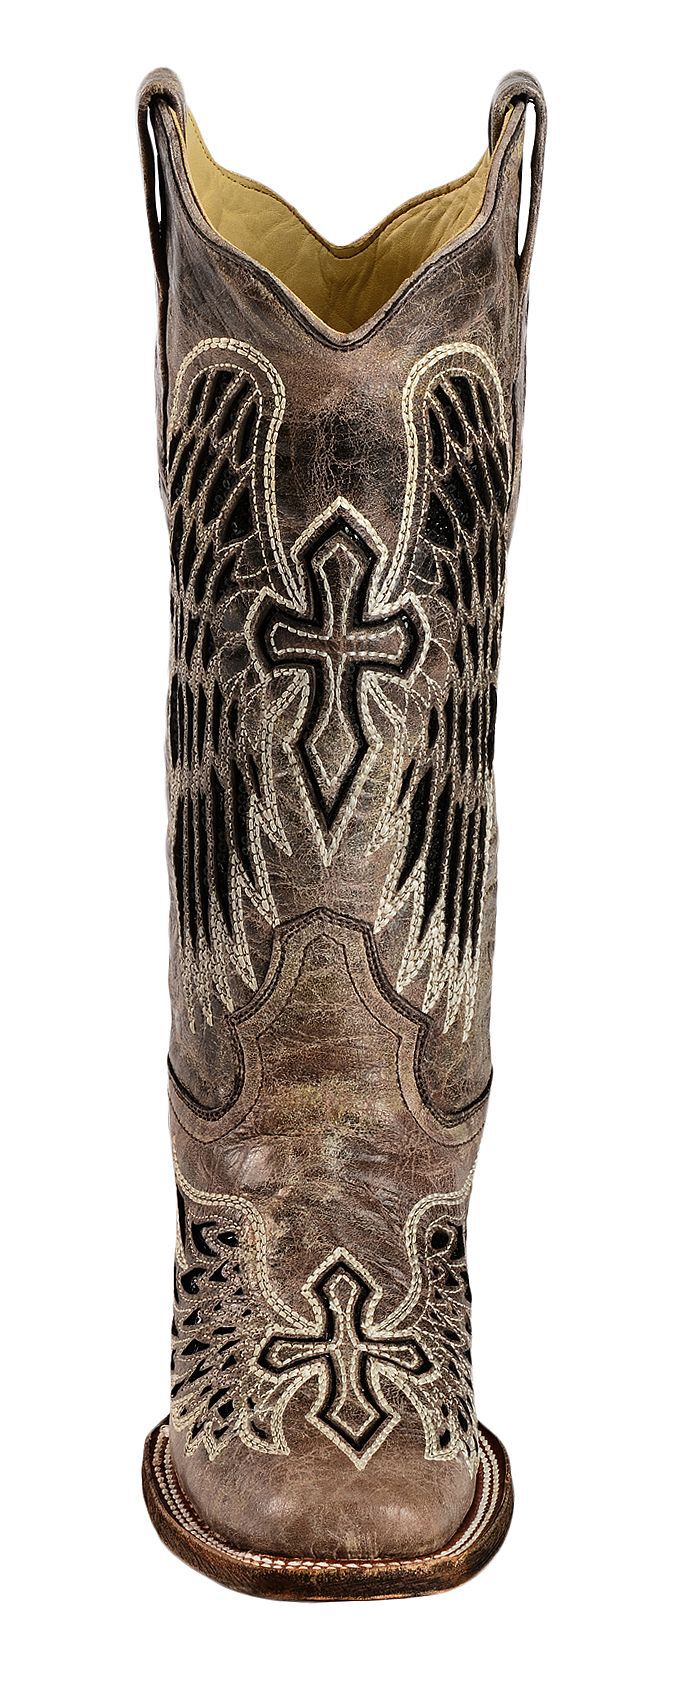 CORRAL Boy's Girl's Black Brown Embroidered Wing Cross Western Boots G1053 NIB 